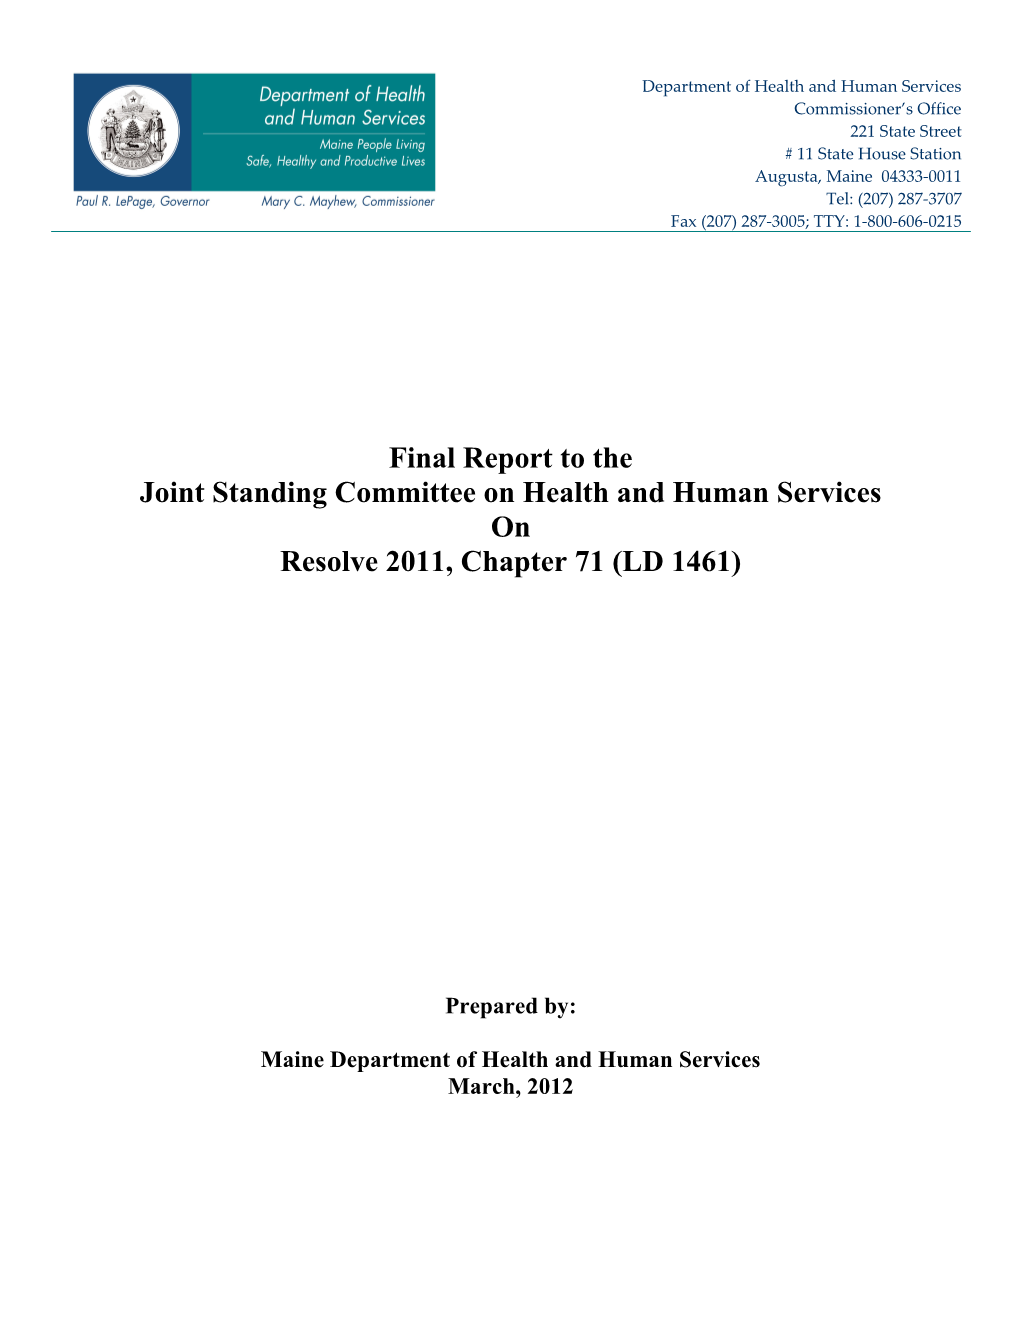 Joint Standing Committee on Health and Human Services